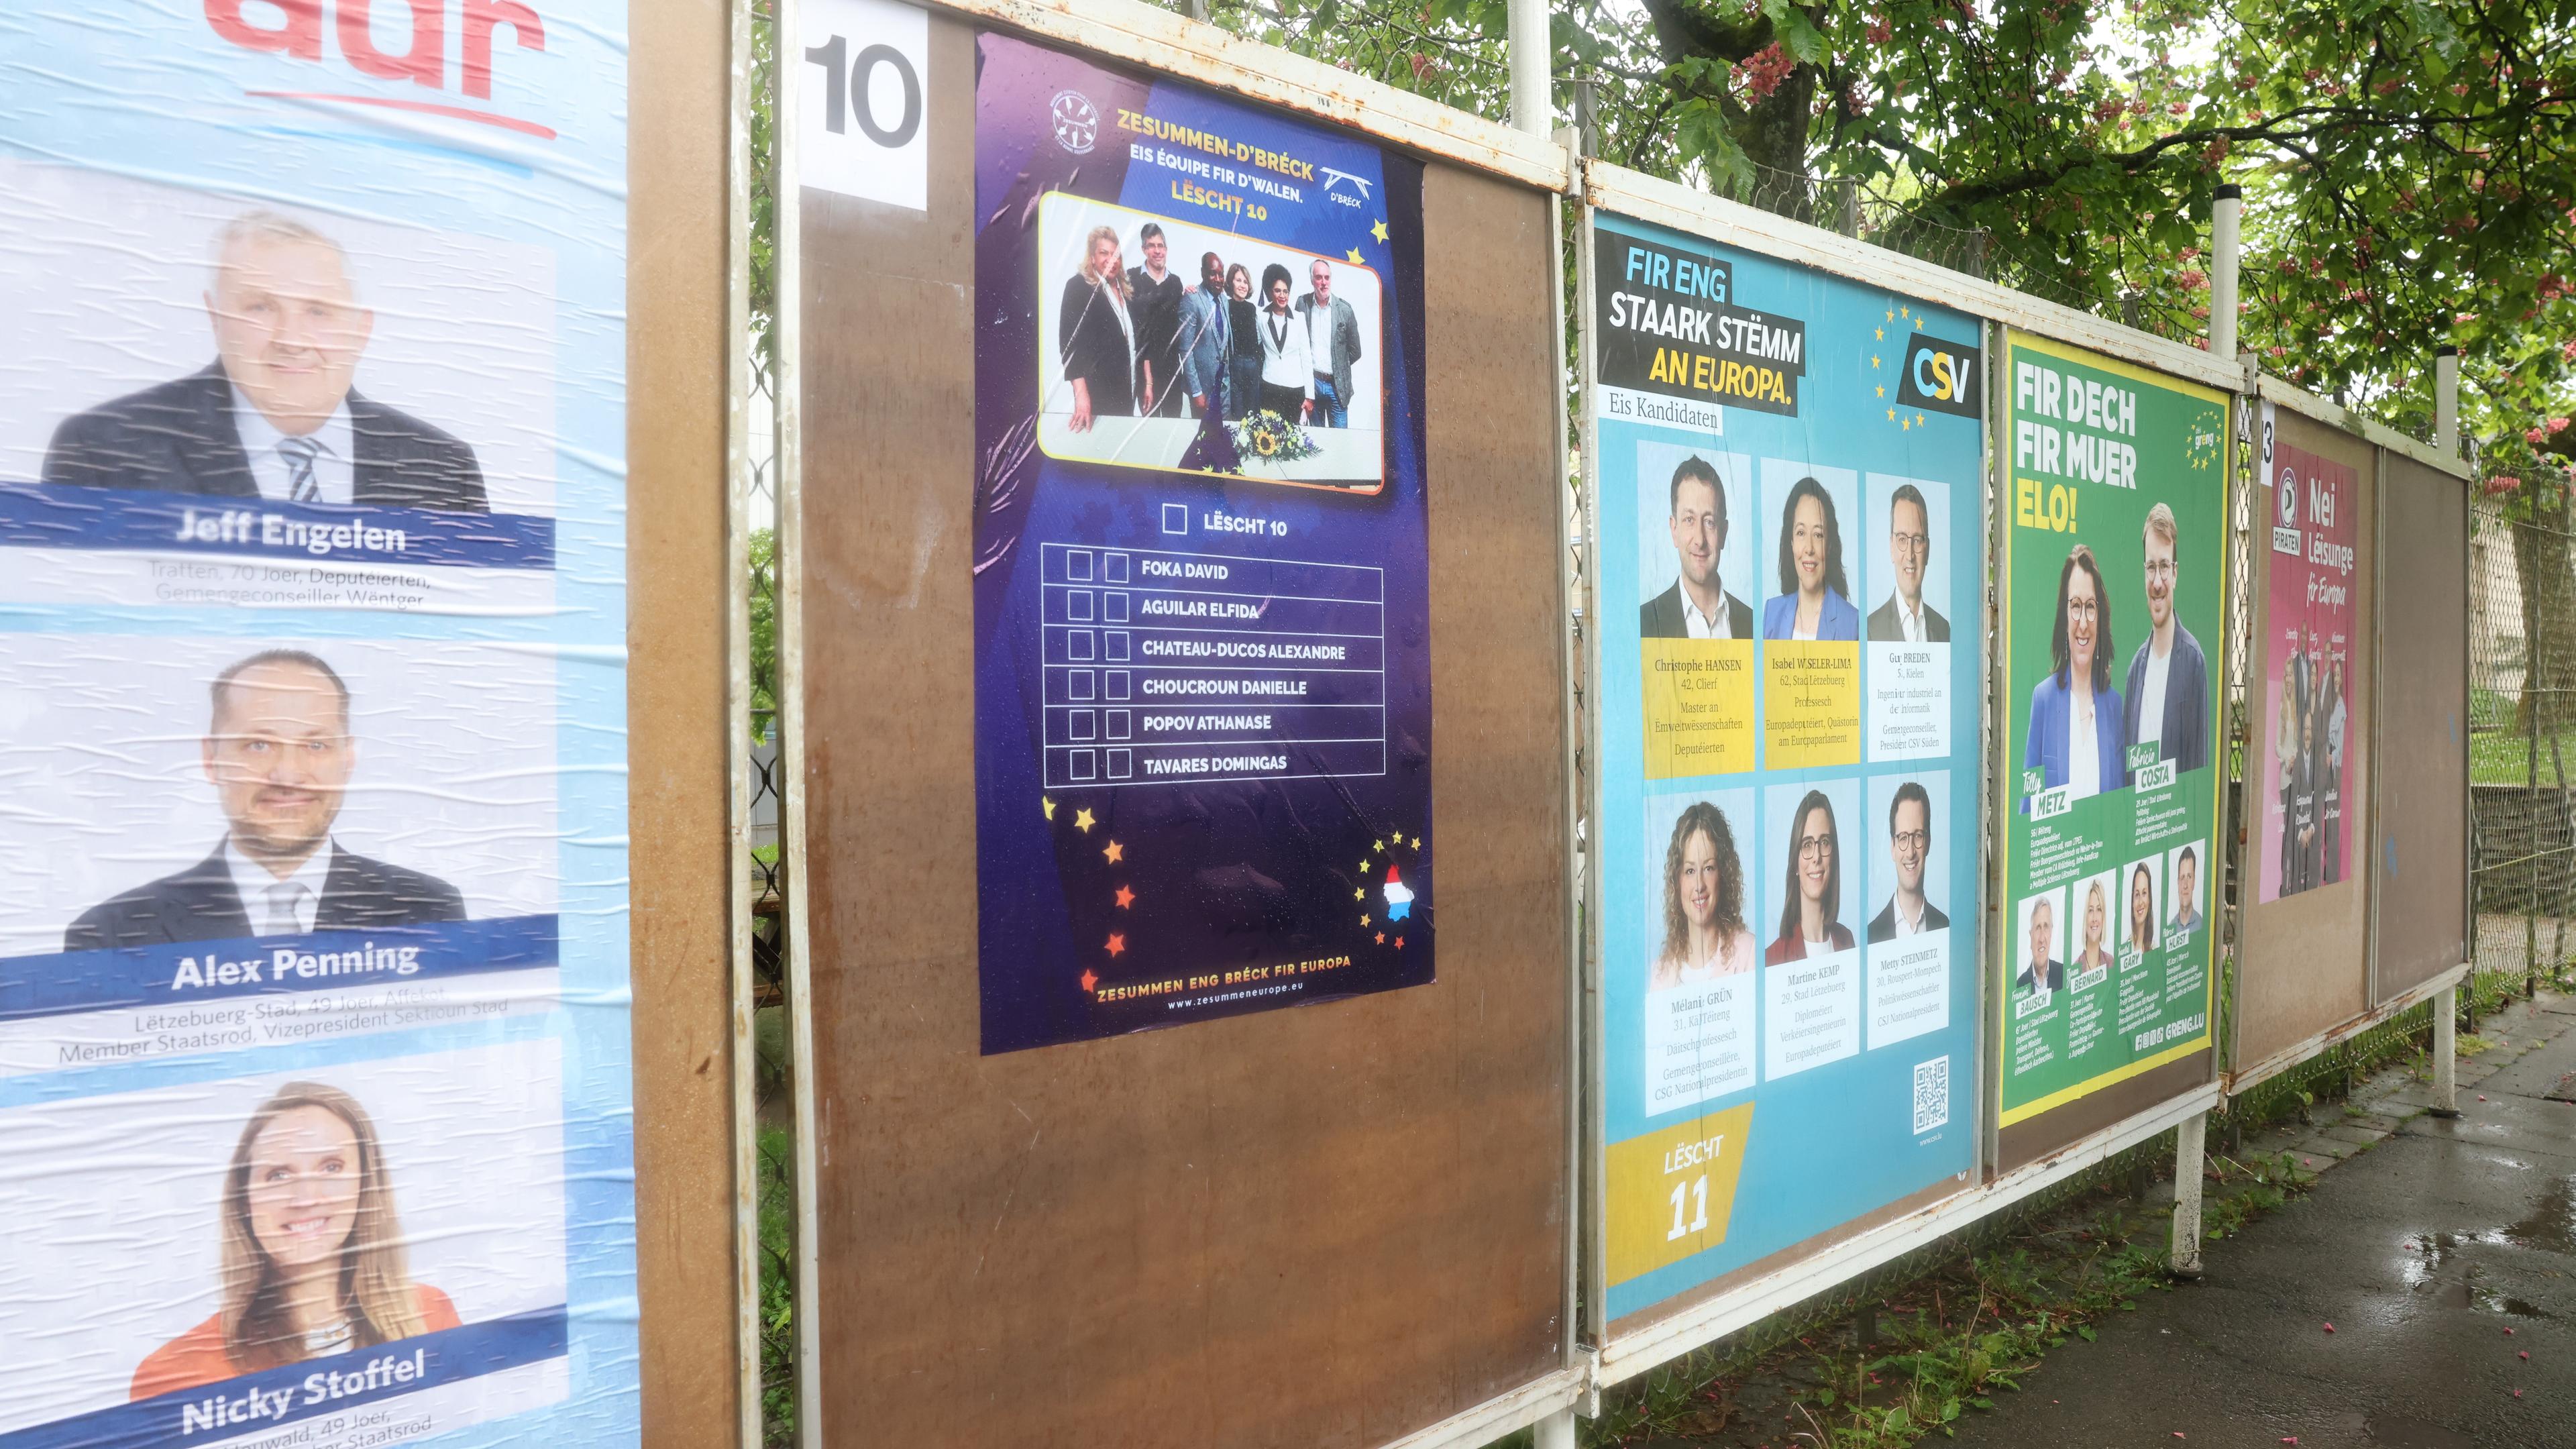 Campaigning for the EU elections officially kicked off over the weekend when parties began putting up election posters and begin distributing campaign material 